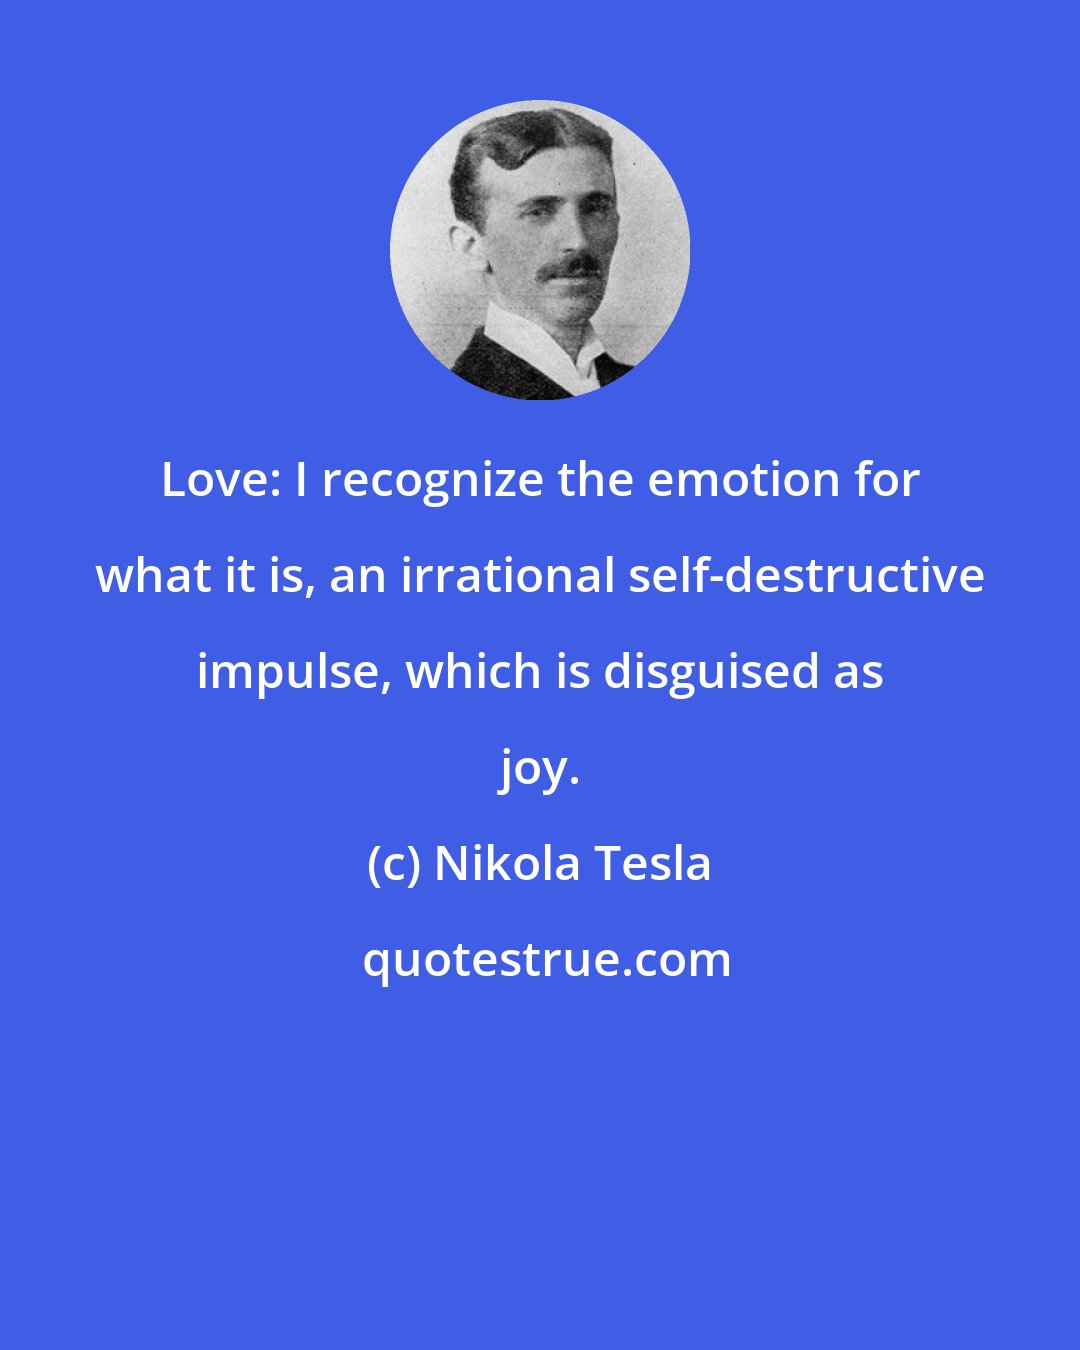 Nikola Tesla: Love: I recognize the emotion for what it is, an irrational self-destructive impulse, which is disguised as joy.